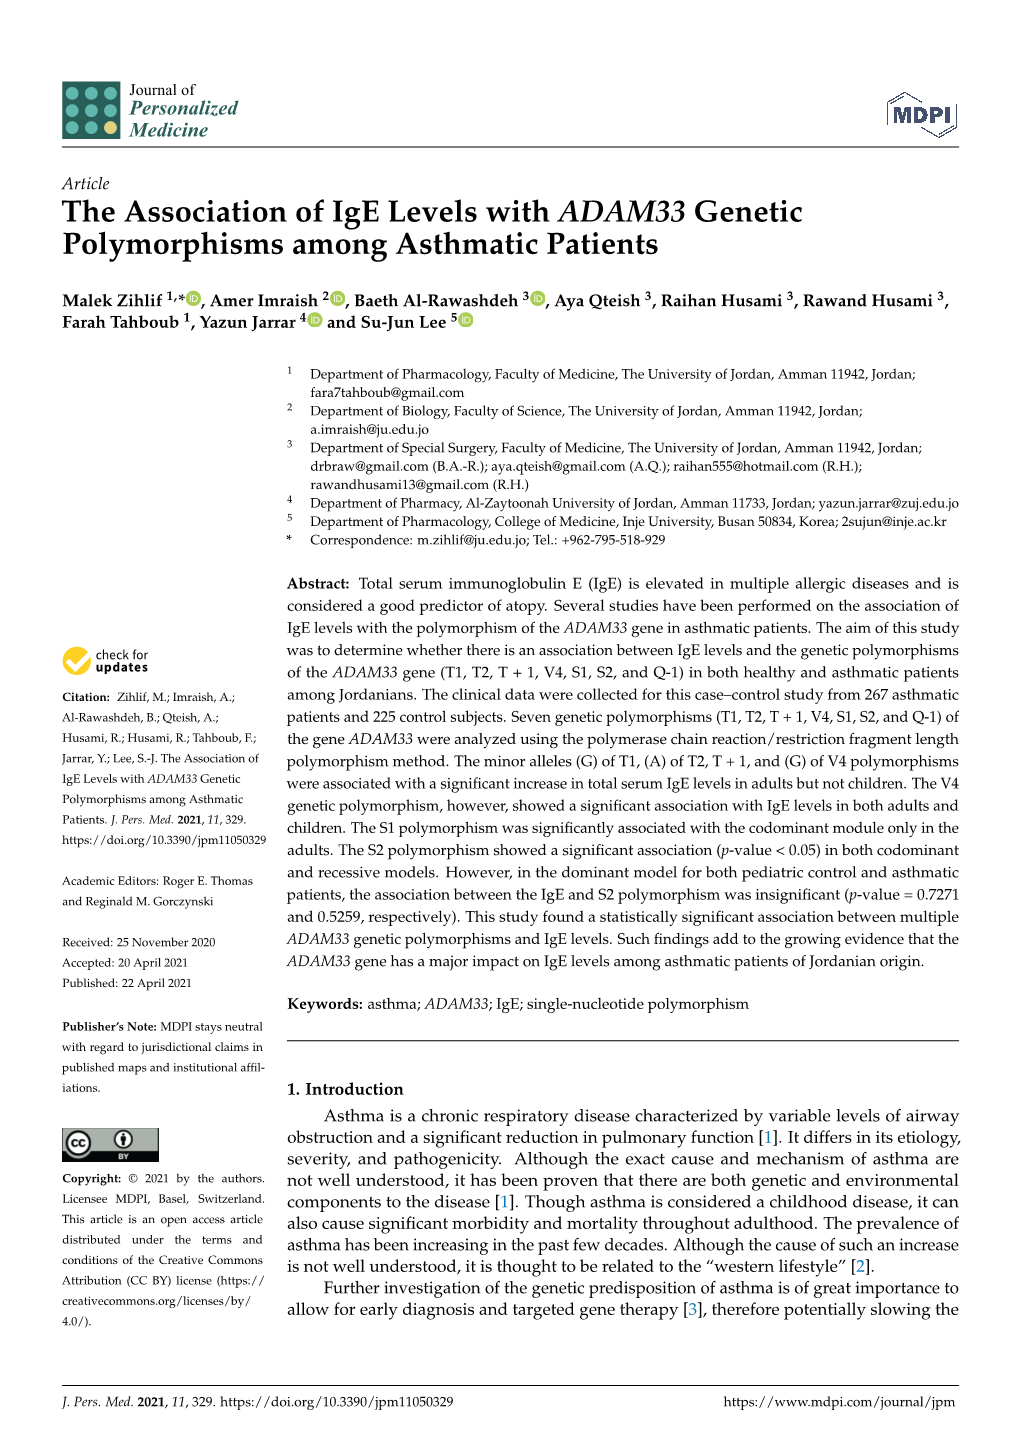 The Association of Ige Levels with ADAM33 Genetic Polymorphisms Among Asthmatic Patients